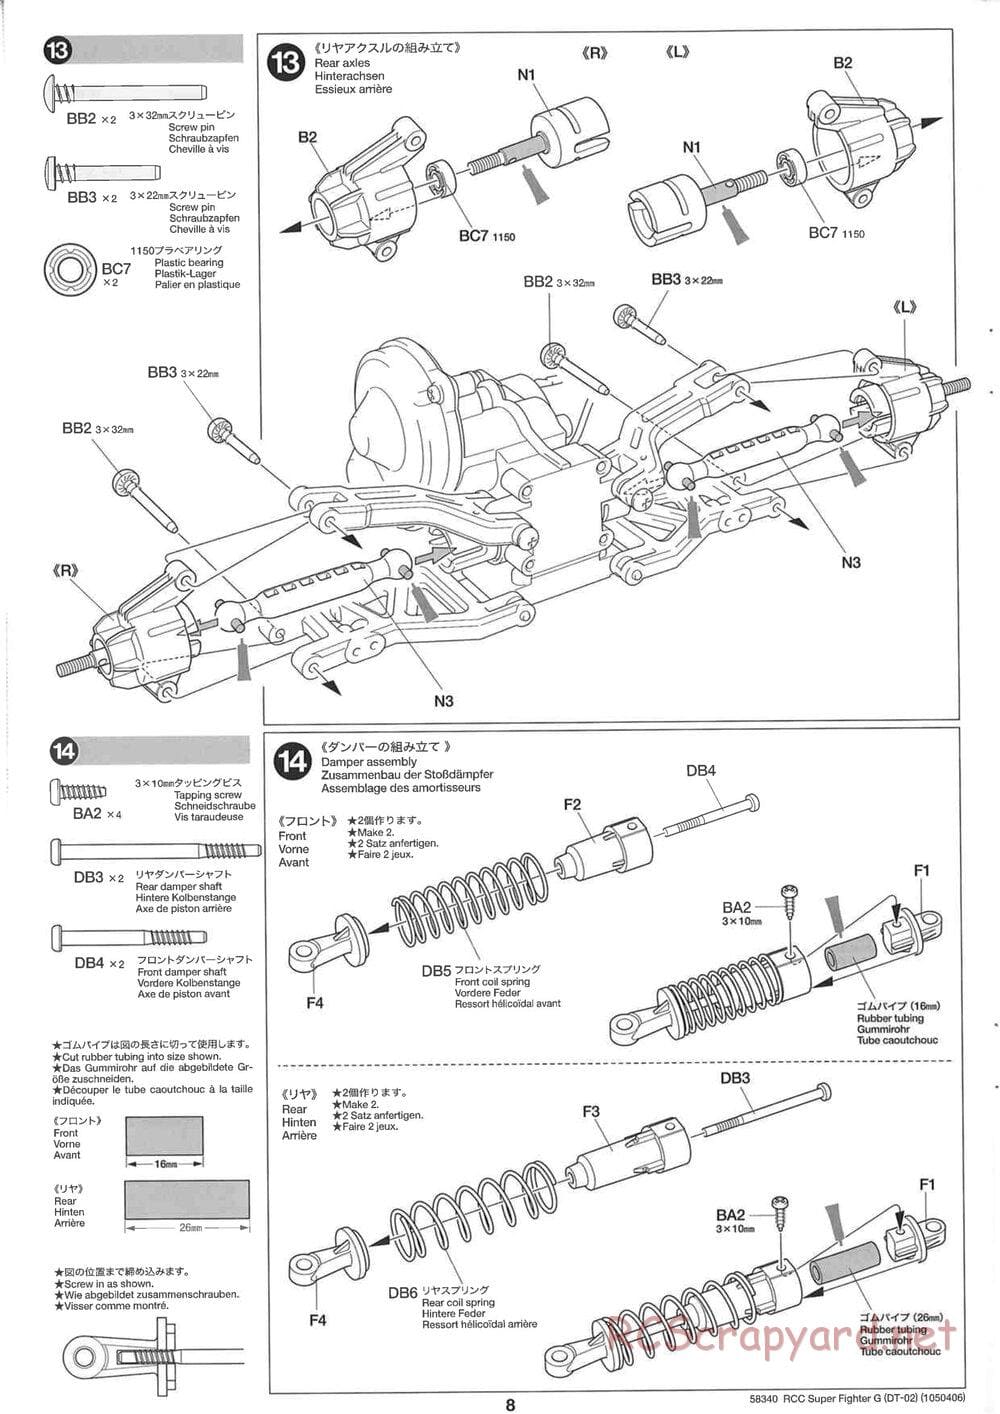 Tamiya - Super Fighter G Chassis - Manual - Page 8